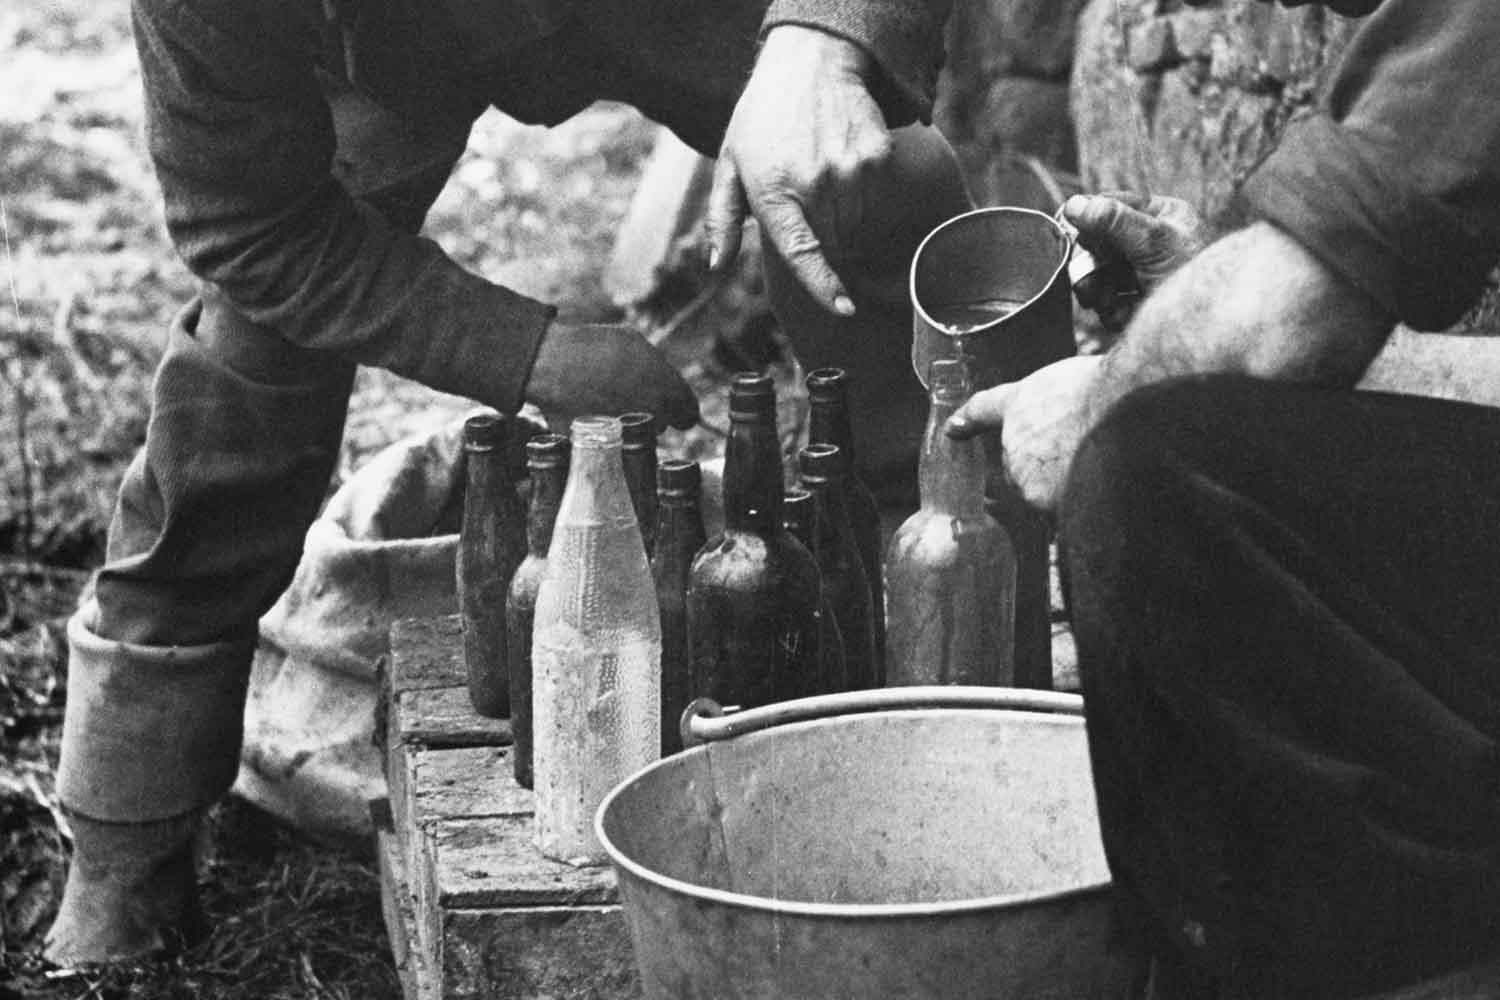 From 1952: poitin makers are still active in remote parts of Ireland despite official dissaproval. A local 'specialist' in the illegal liquor shows how it is made. The poteen makers store the liquid into old lemonade or medicine bottles.